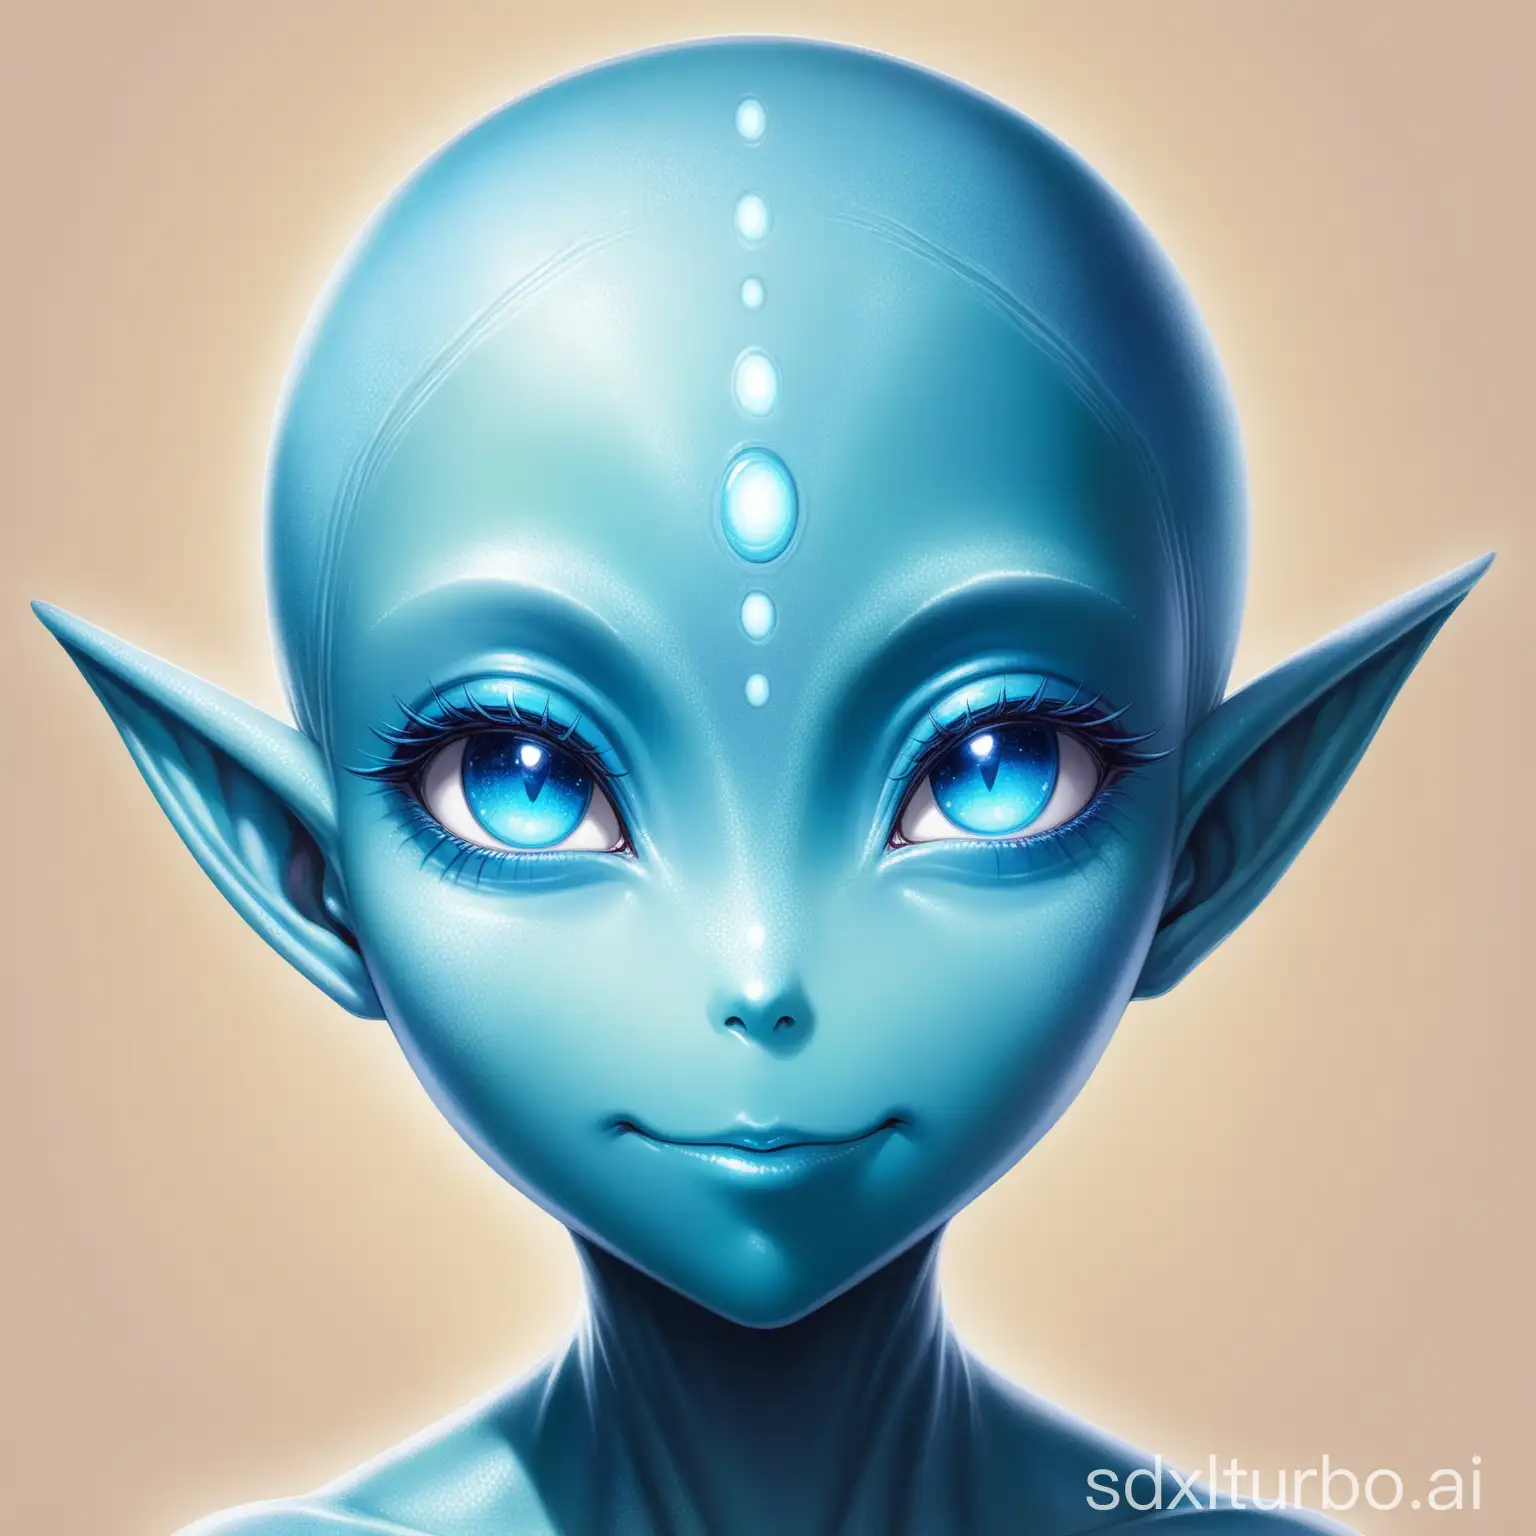 Friendly Alien face with blue skin, cae